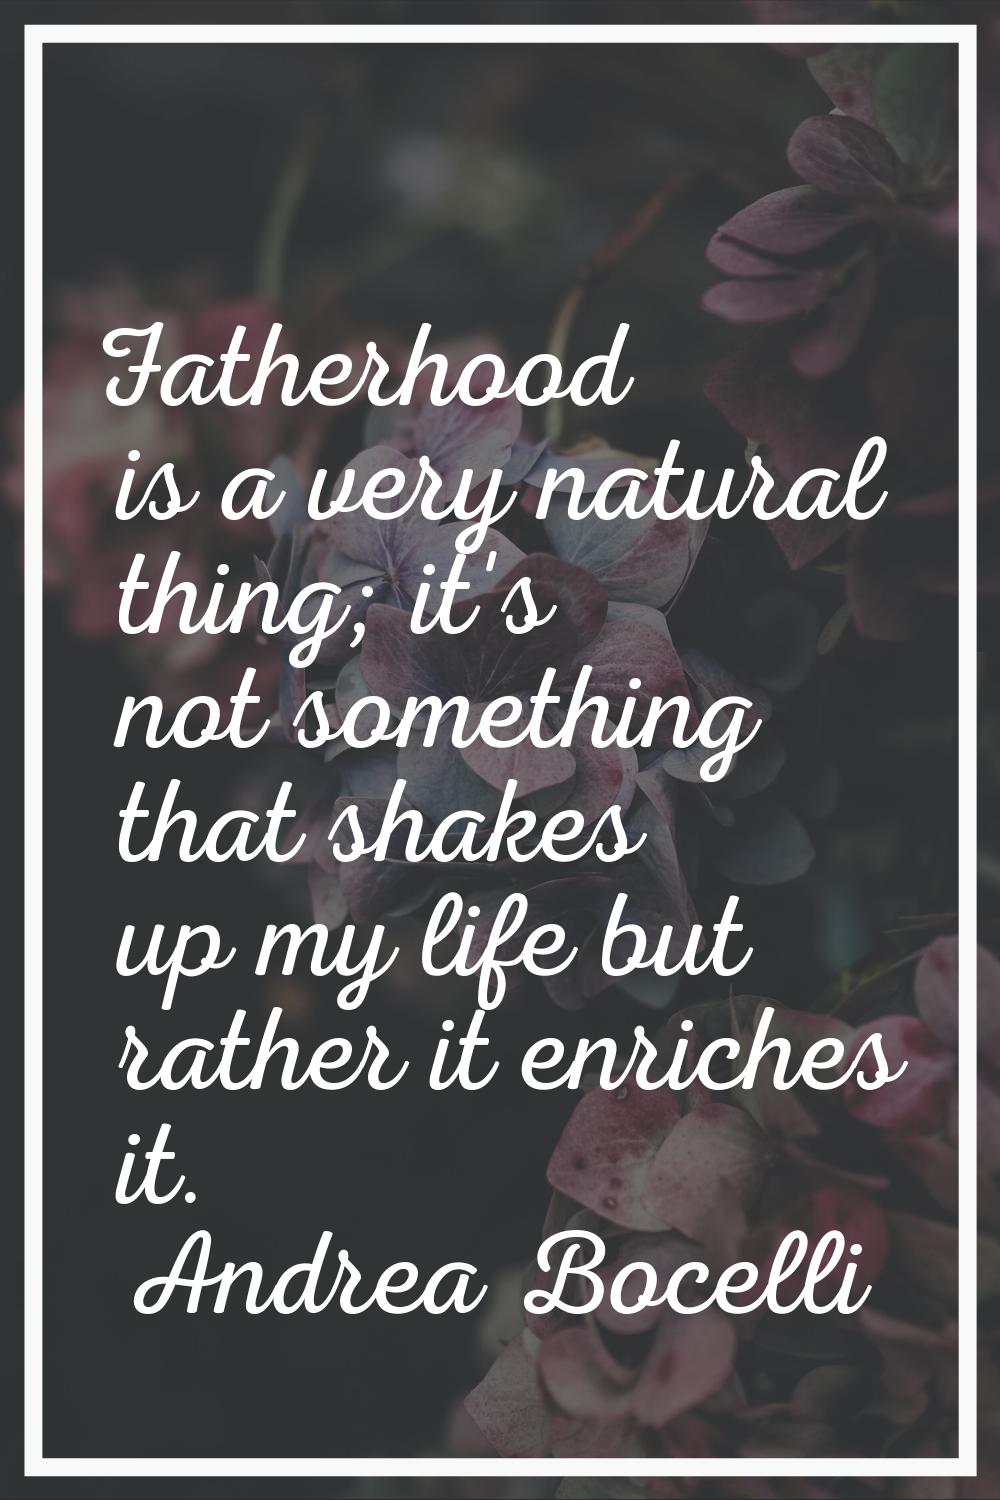 Fatherhood is a very natural thing; it's not something that shakes up my life but rather it enriche